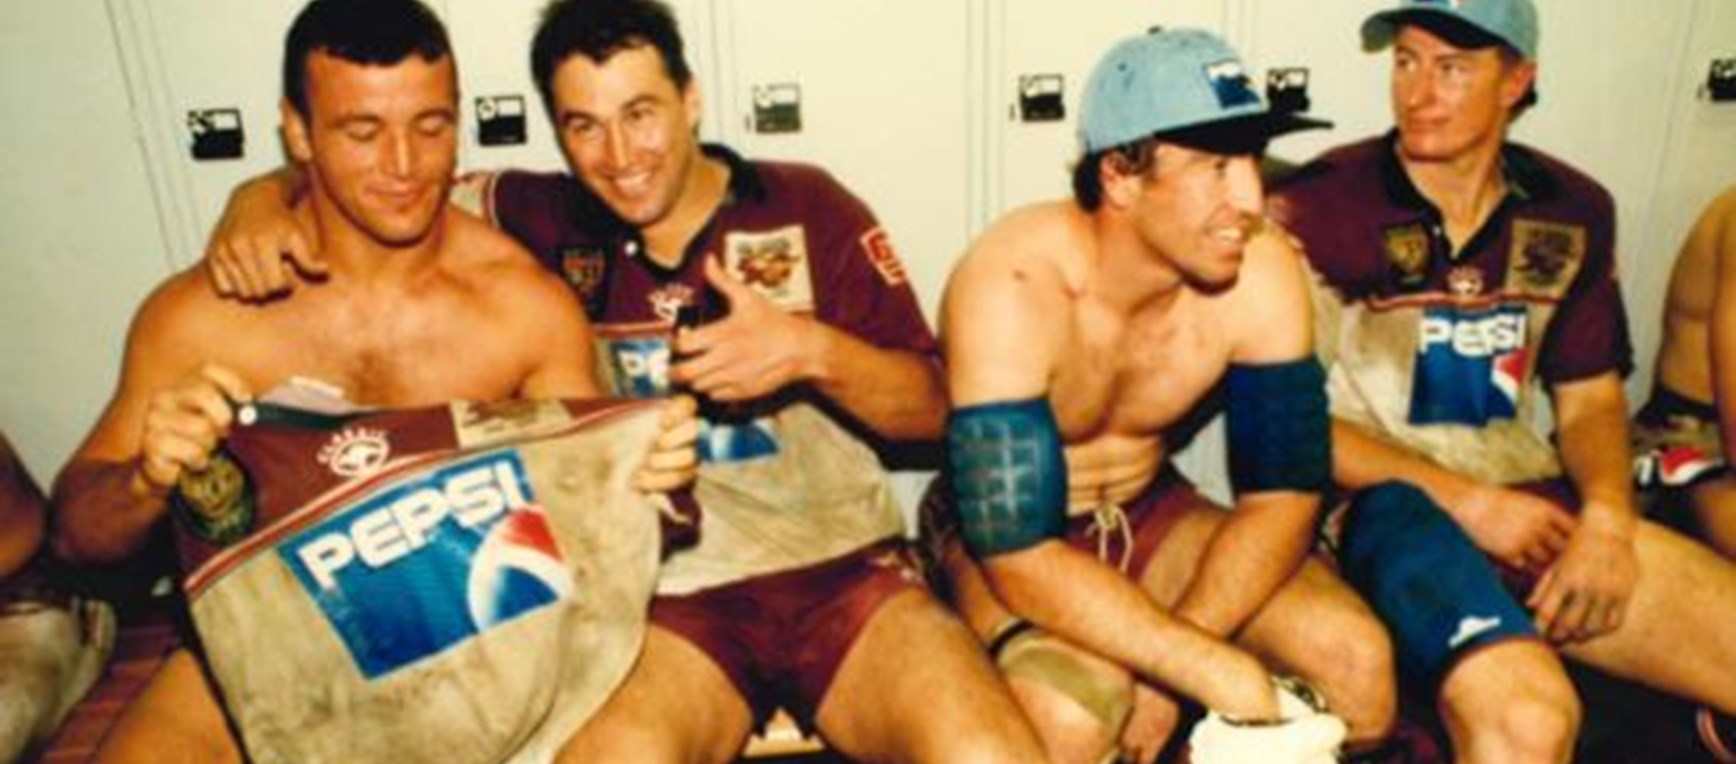 Archives bring to life great Sea Eagles moments